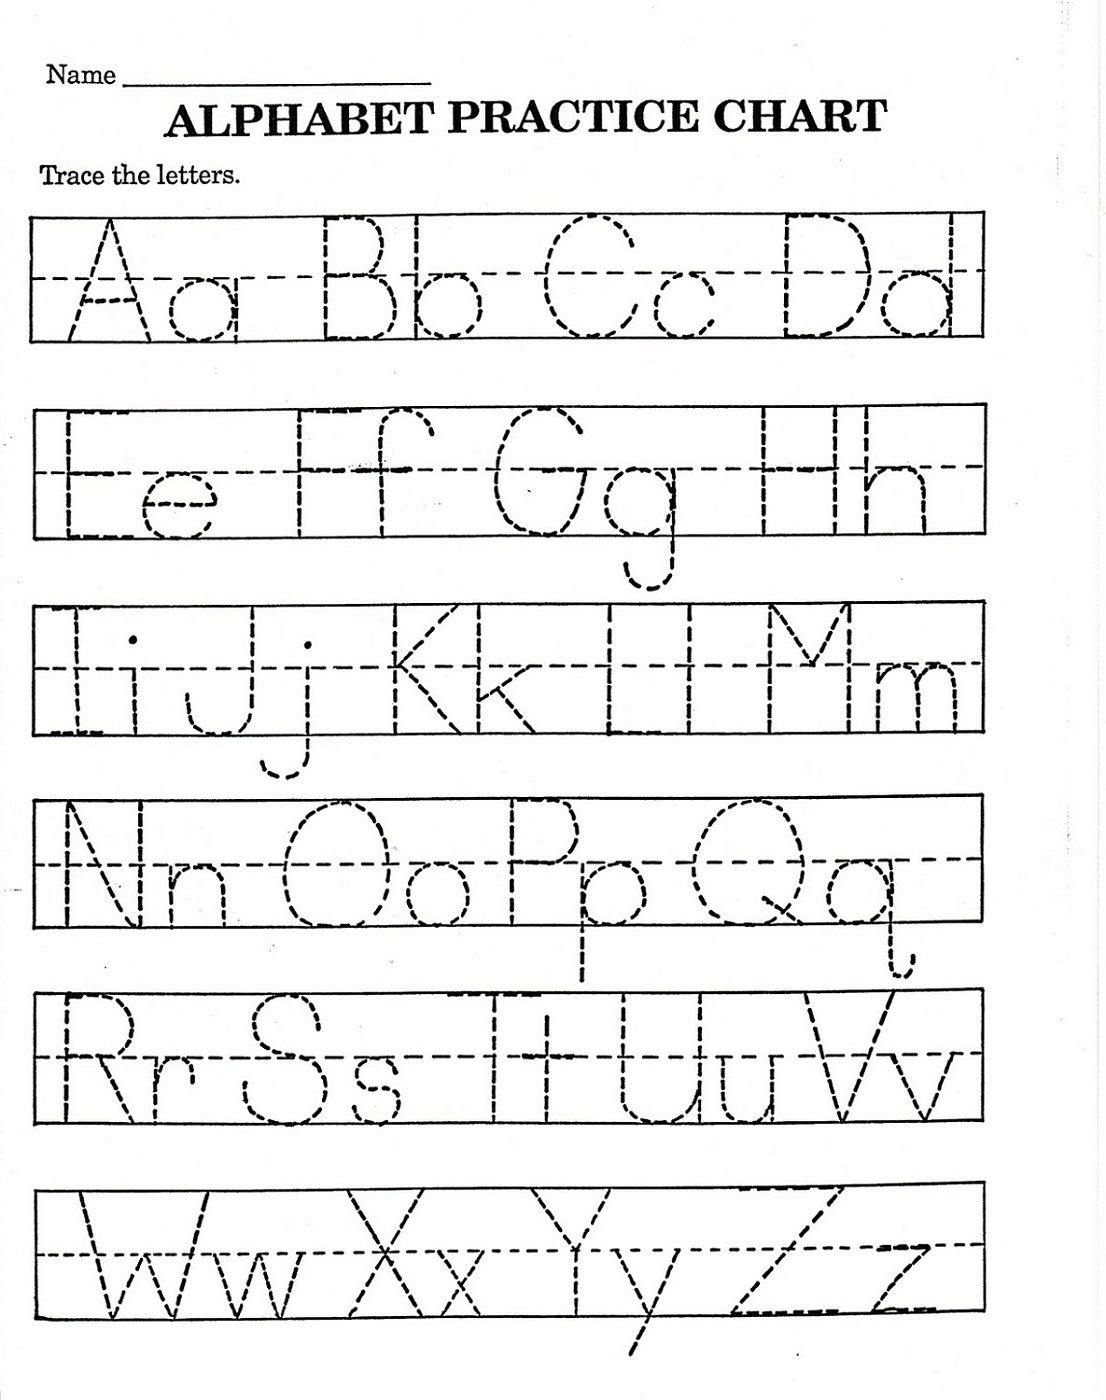 Trace Letter Worksheets Free | Alphabet Tracing Worksheets regarding Pre K Alphabet Worksheets Free